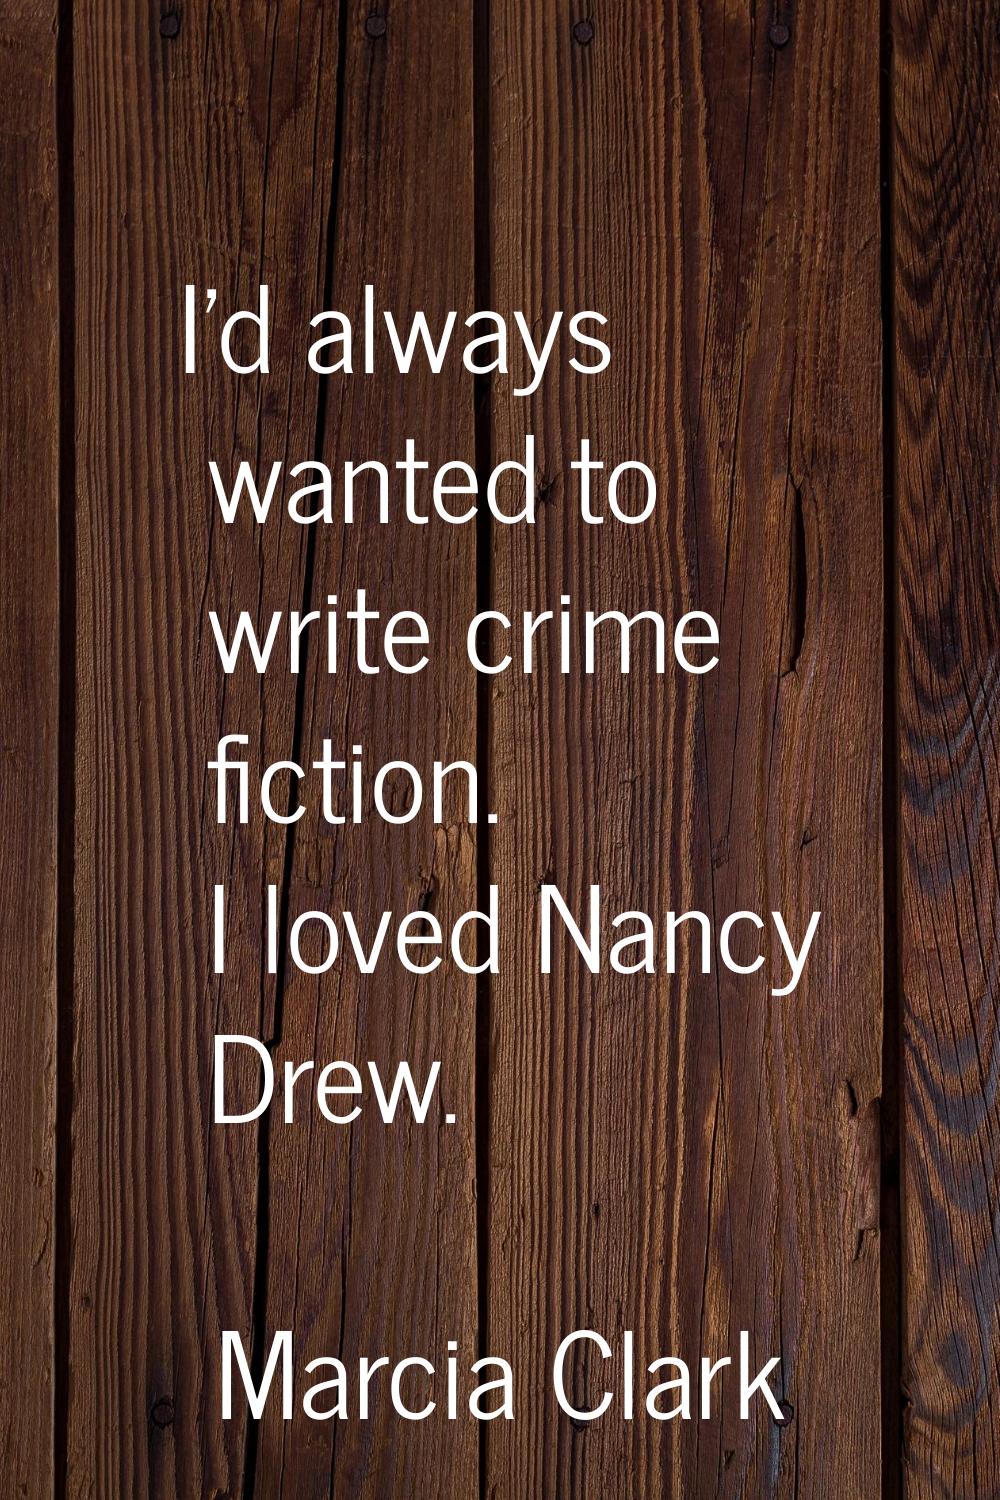 I'd always wanted to write crime fiction. I loved Nancy Drew.